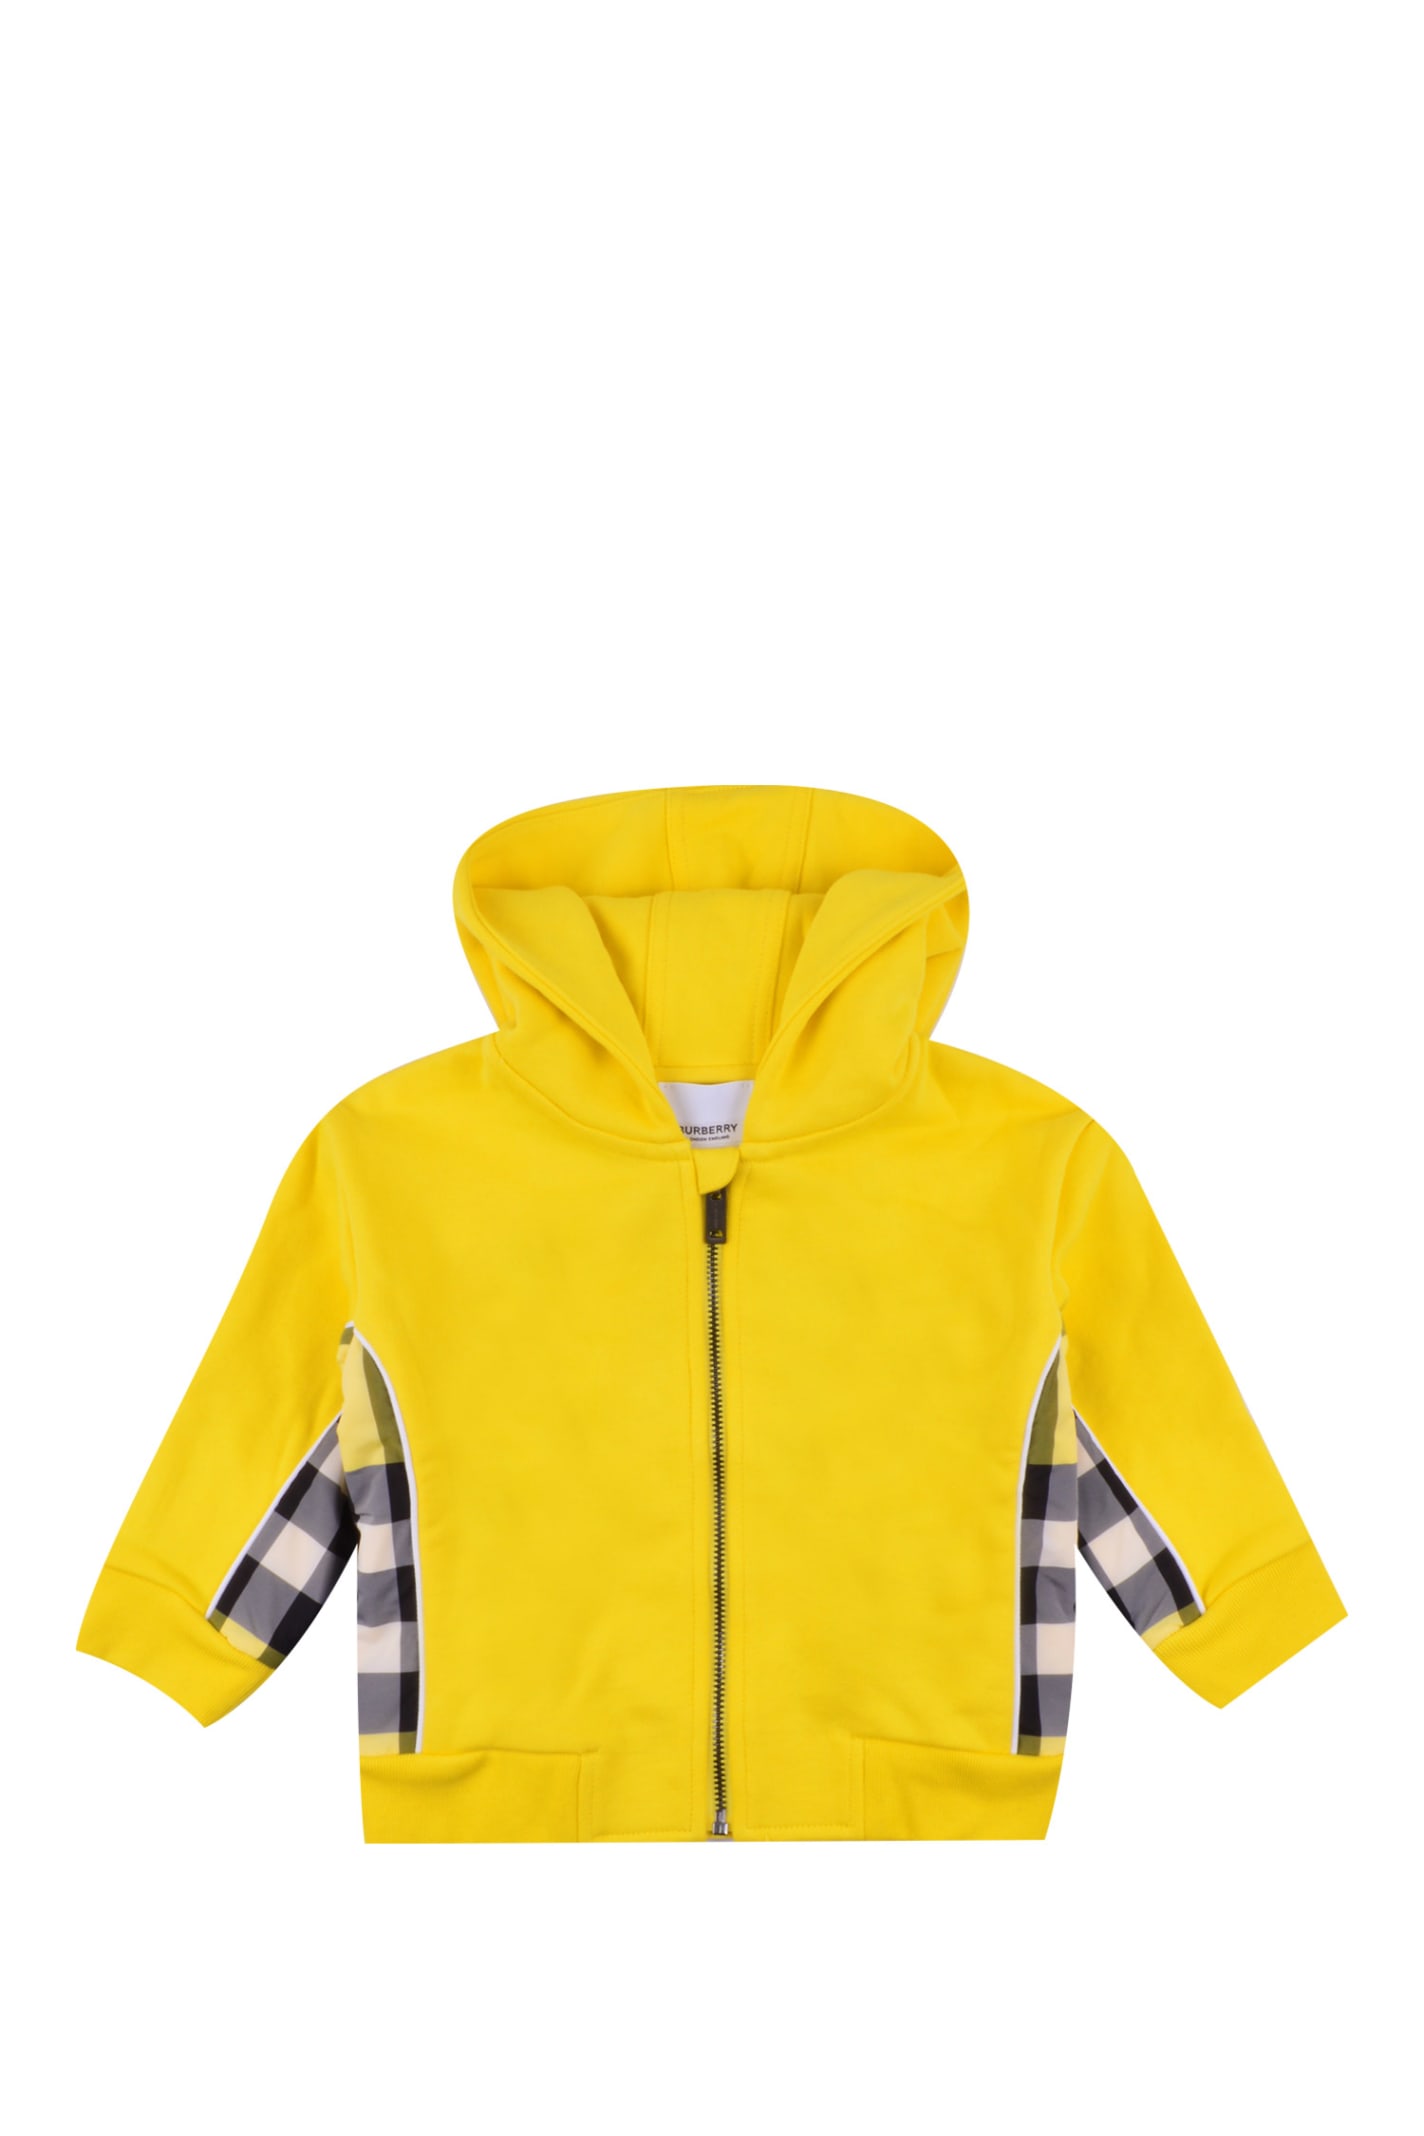 Burberry Babies' Cotton Sweatshirt With Hood And Tartan Inserts In Yellow